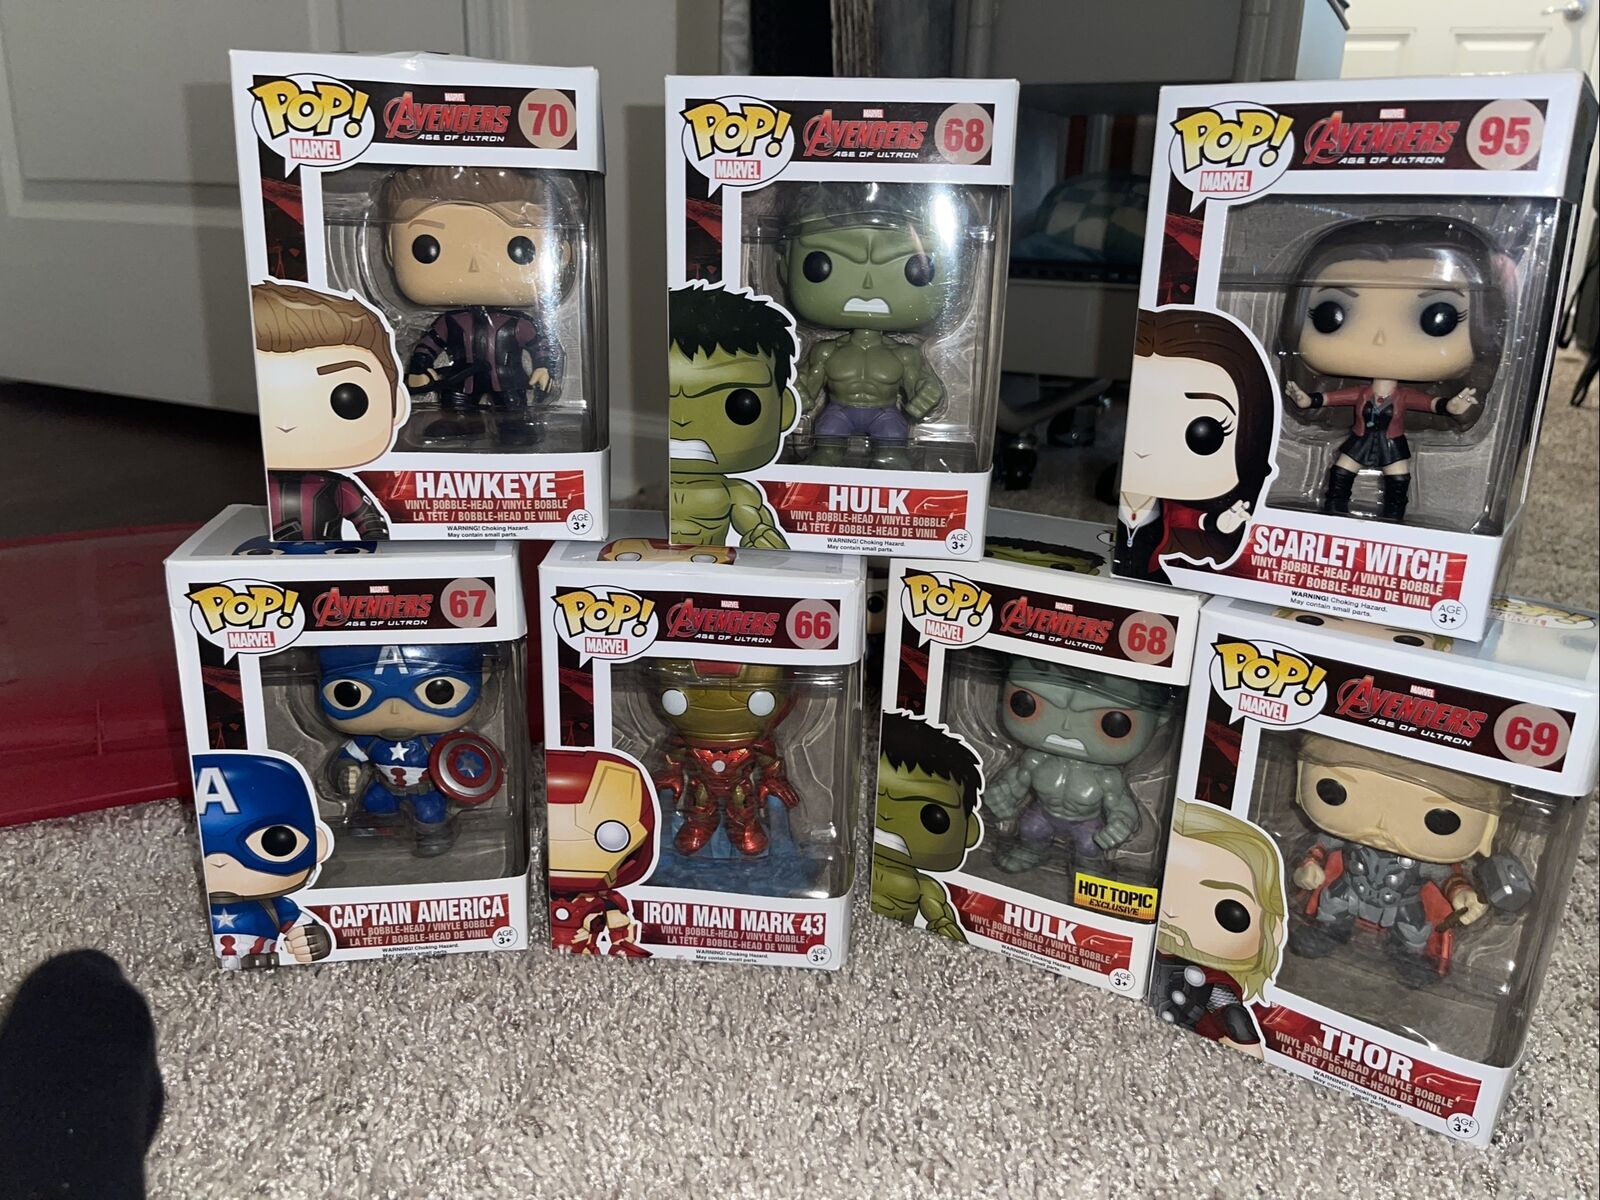 Multiple Funkos From The Collection Of Avengers Age Of Ultron: 66,67,68,69,70,95